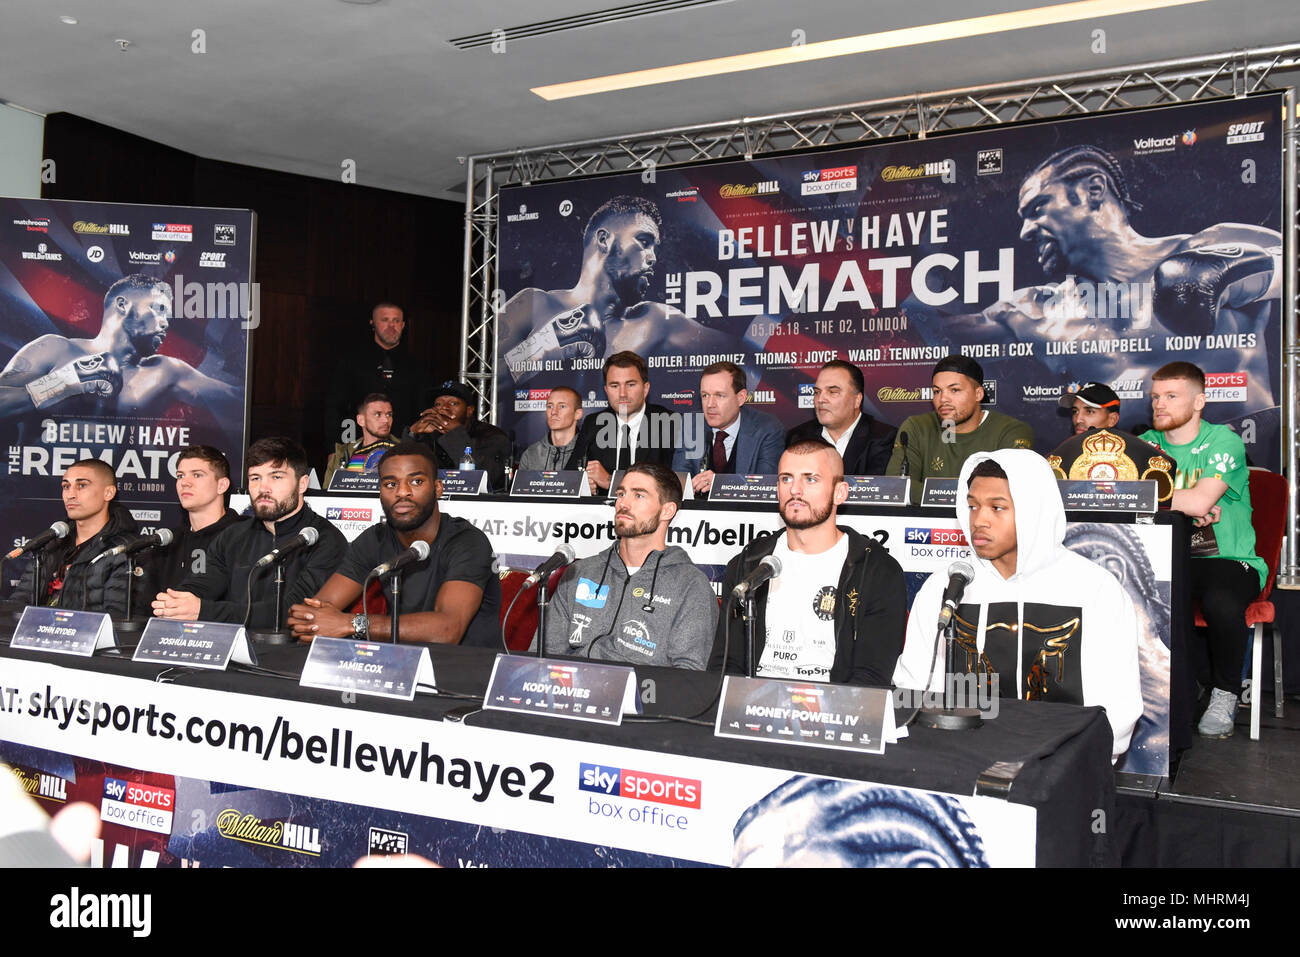 London, UK.  3 May 2018. Press conference at the Park Plaza hotel in Westminster for the undercard of the Tony Bellew v David Haye heavyweight rematch.  The fight takes place at The O2, London on 5 May 2018.  Credit: Stephen Chung / Alamy Live News Stock Photo